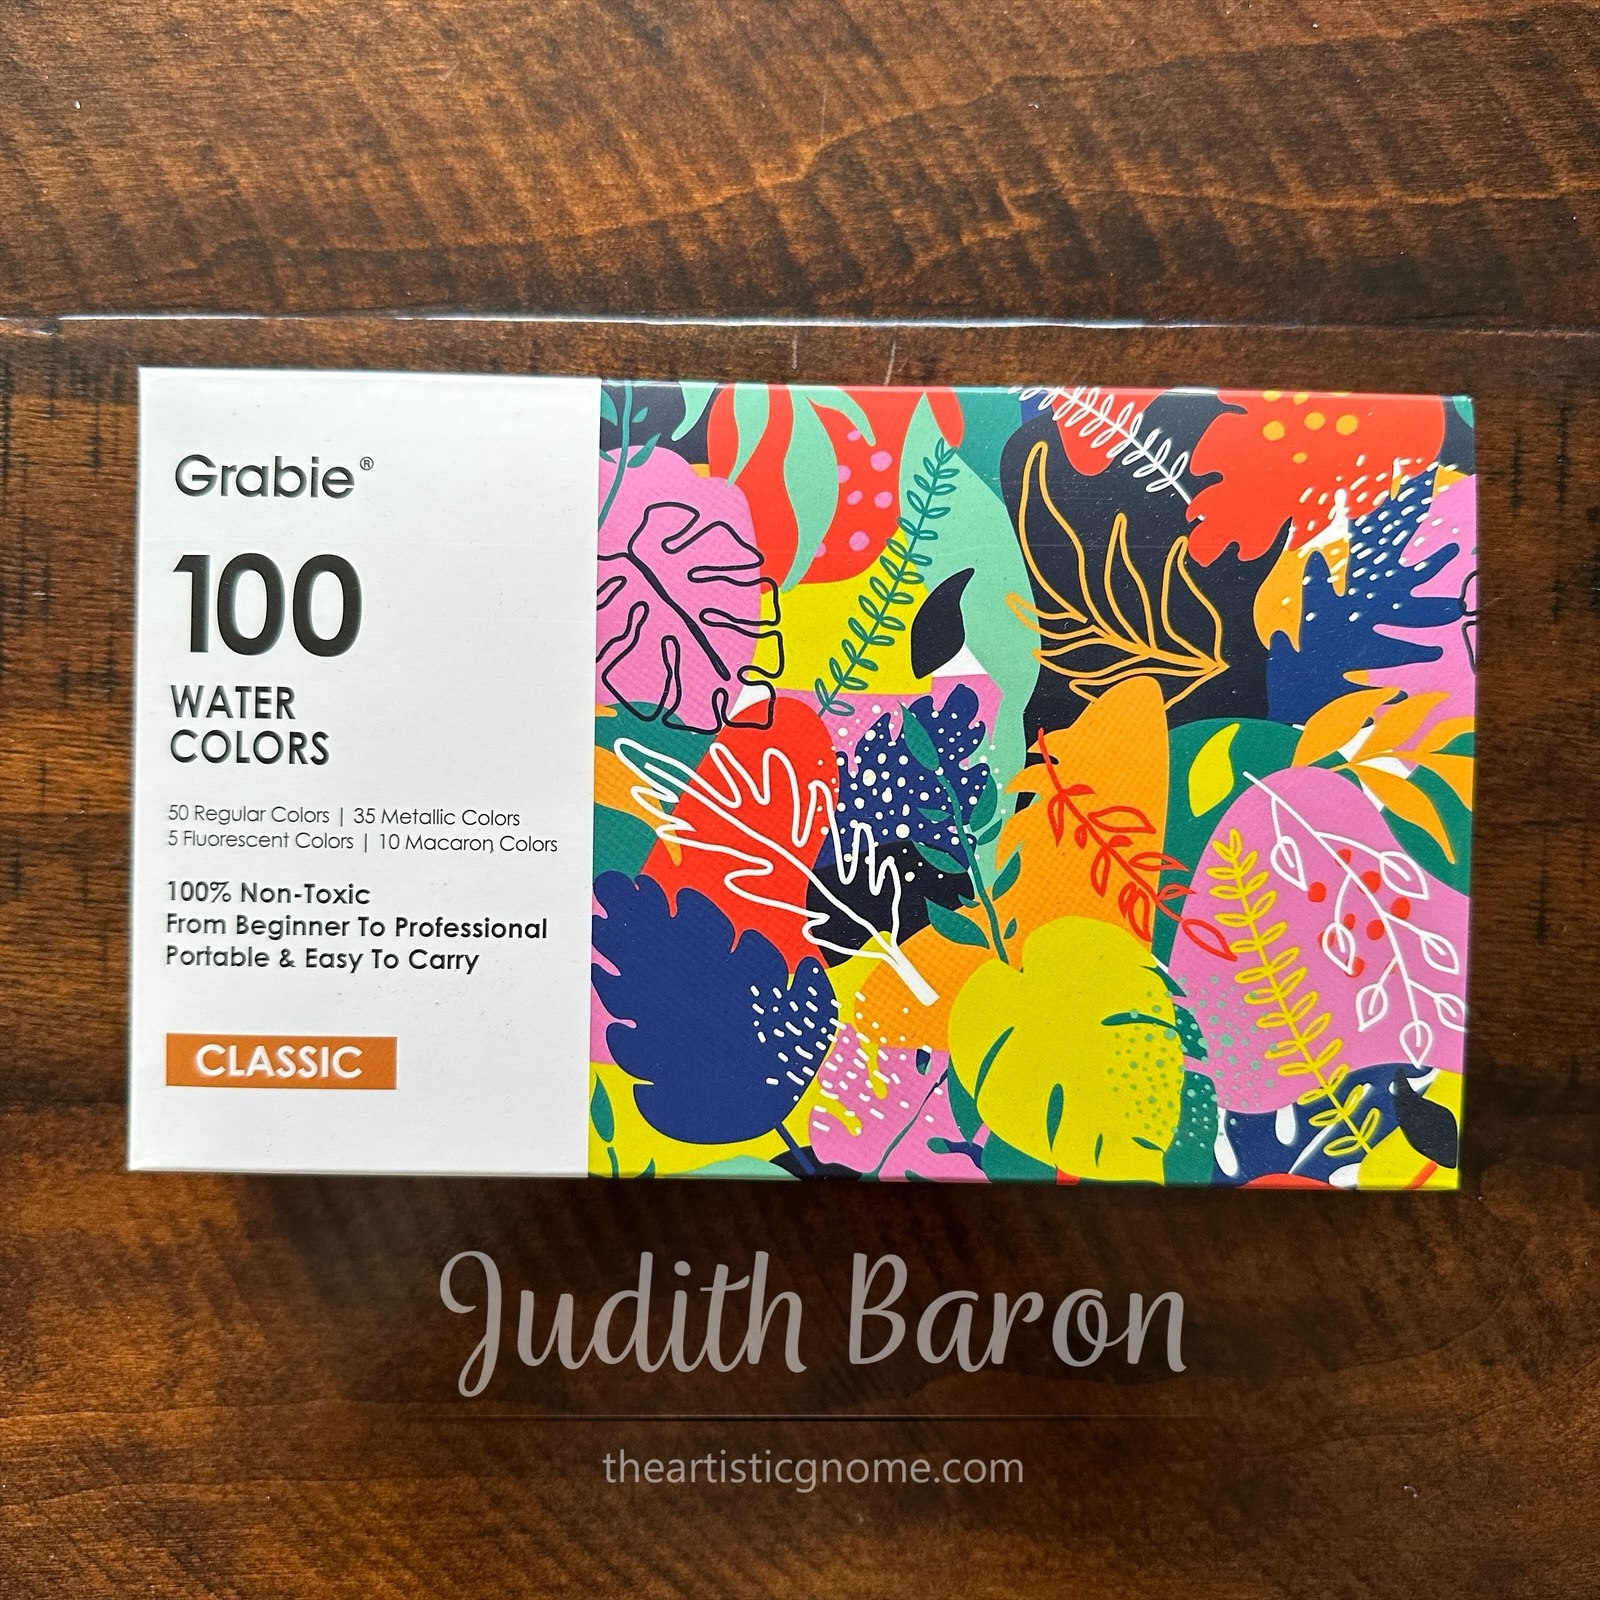 First Impressions, Grabie 100 Watercolor Paints